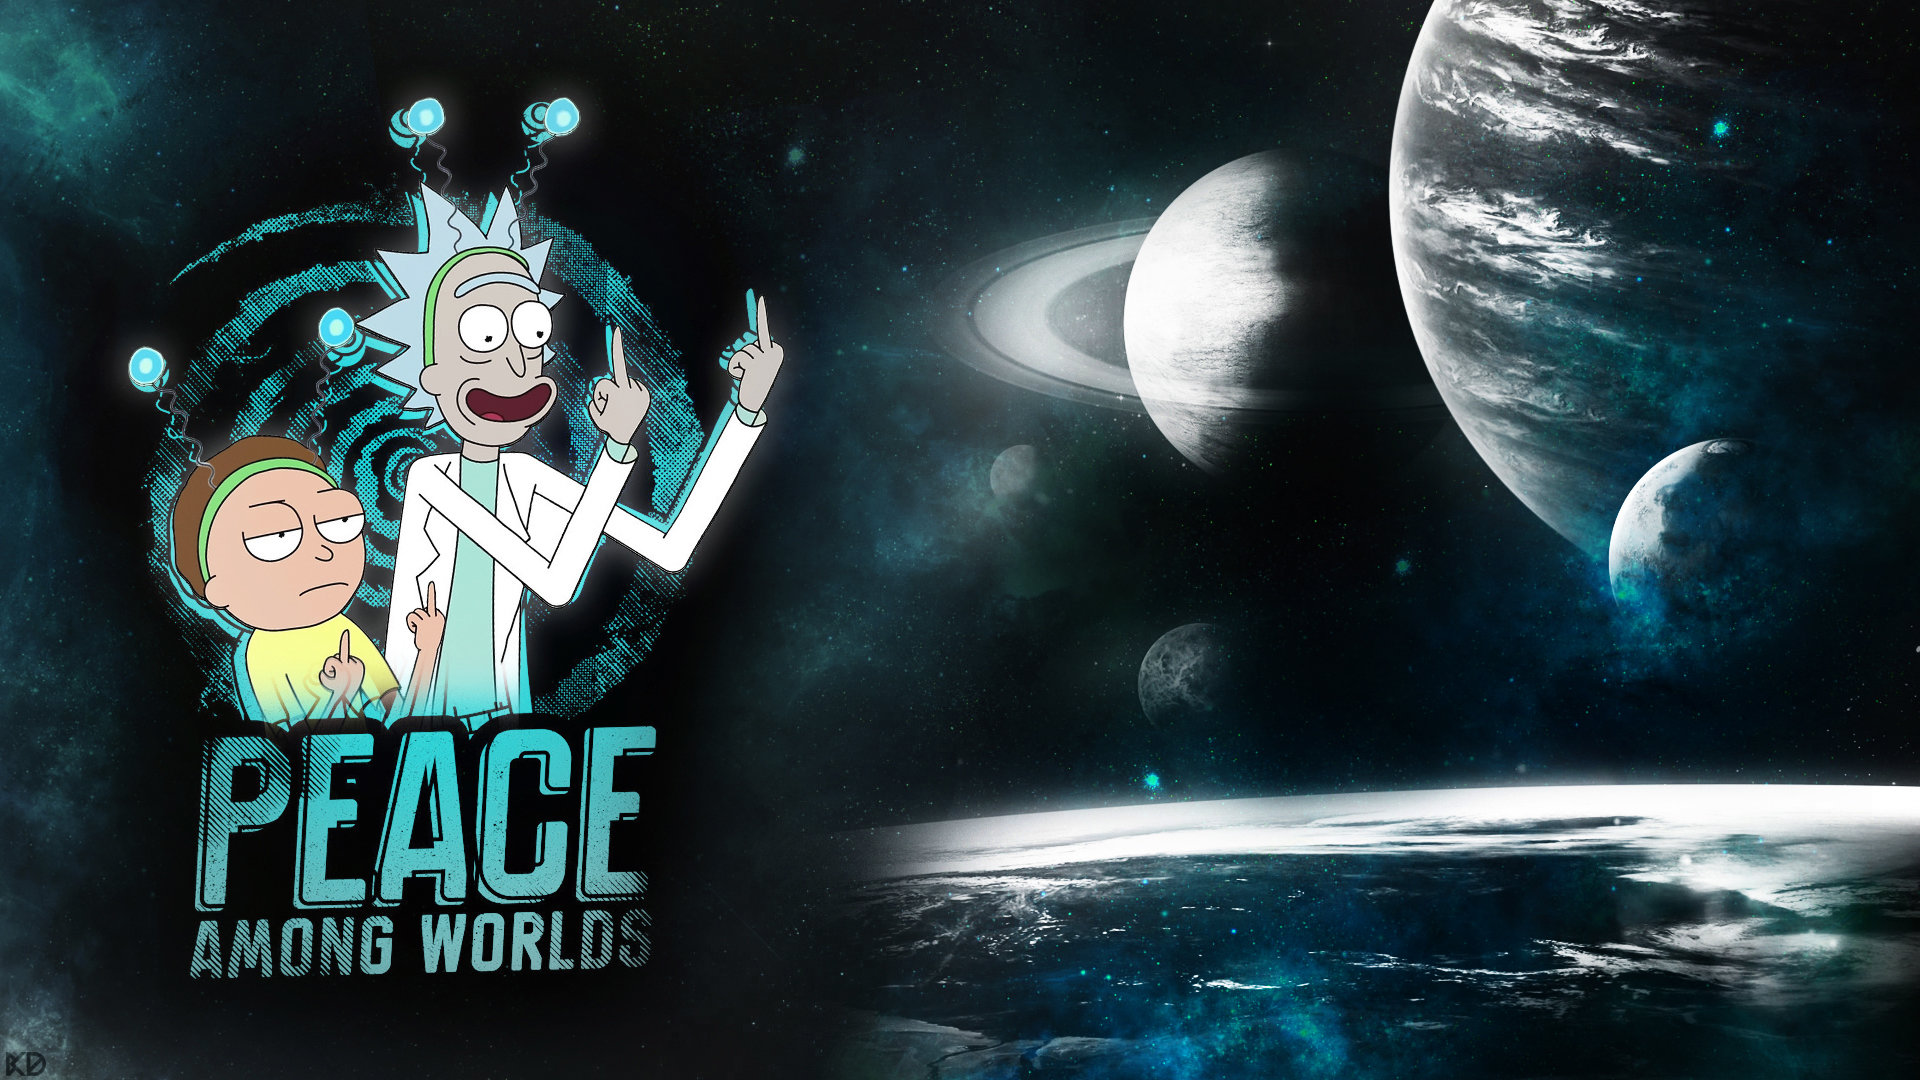 Rick And Morty wallpapers HD for desktop backgrounds